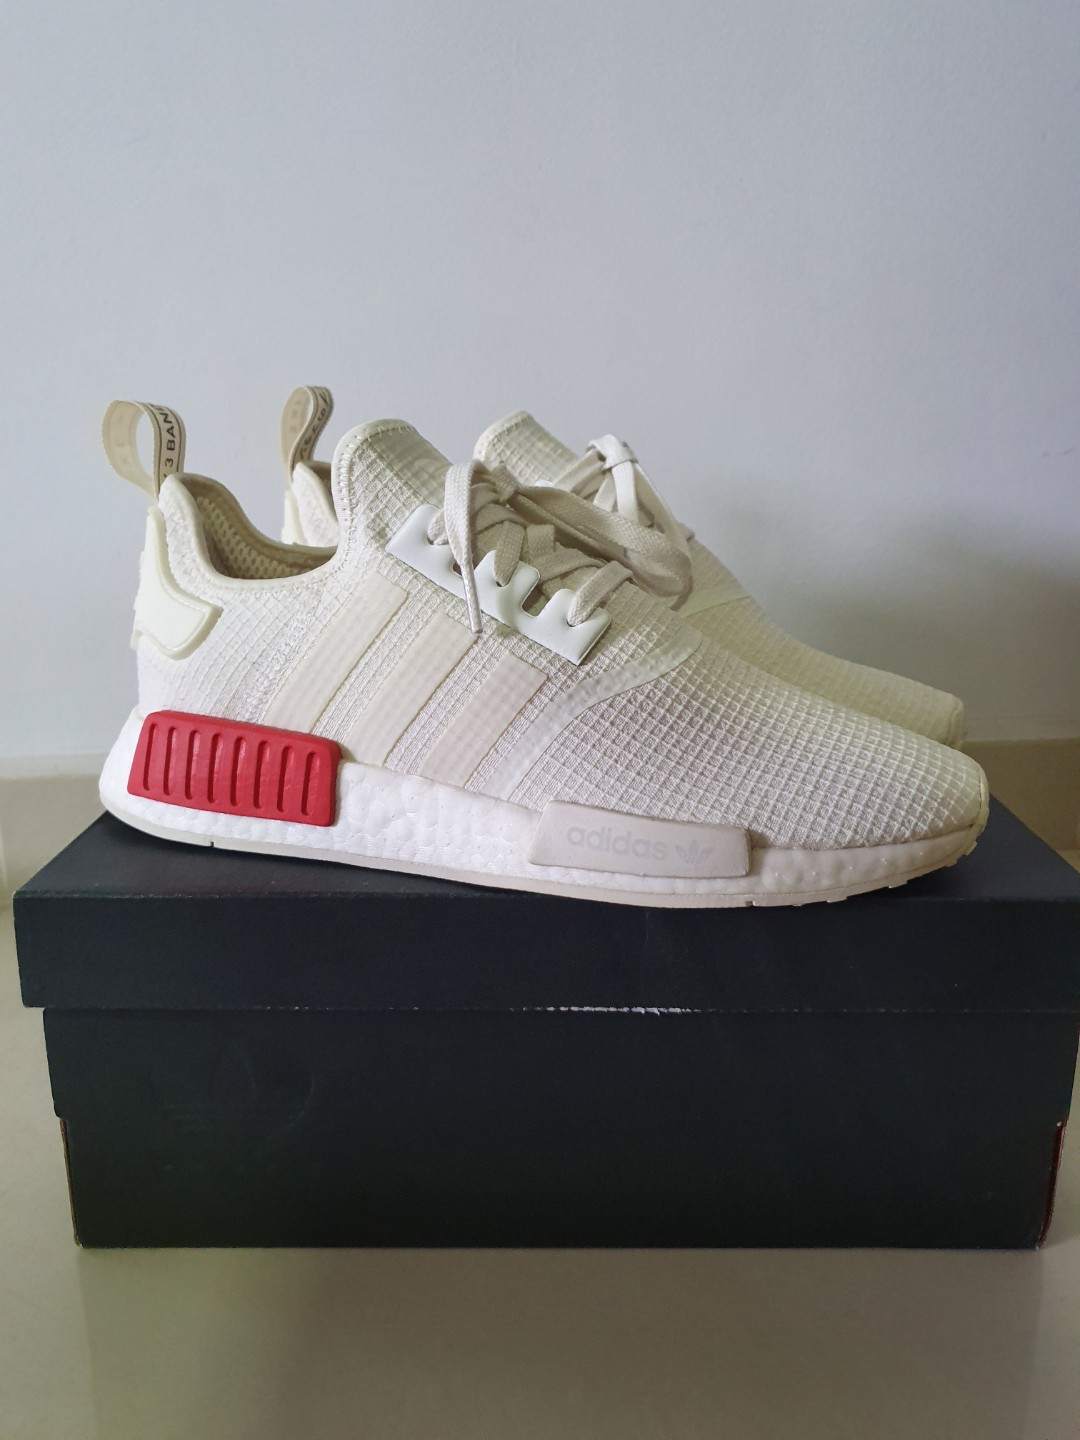 nmd off white lush red